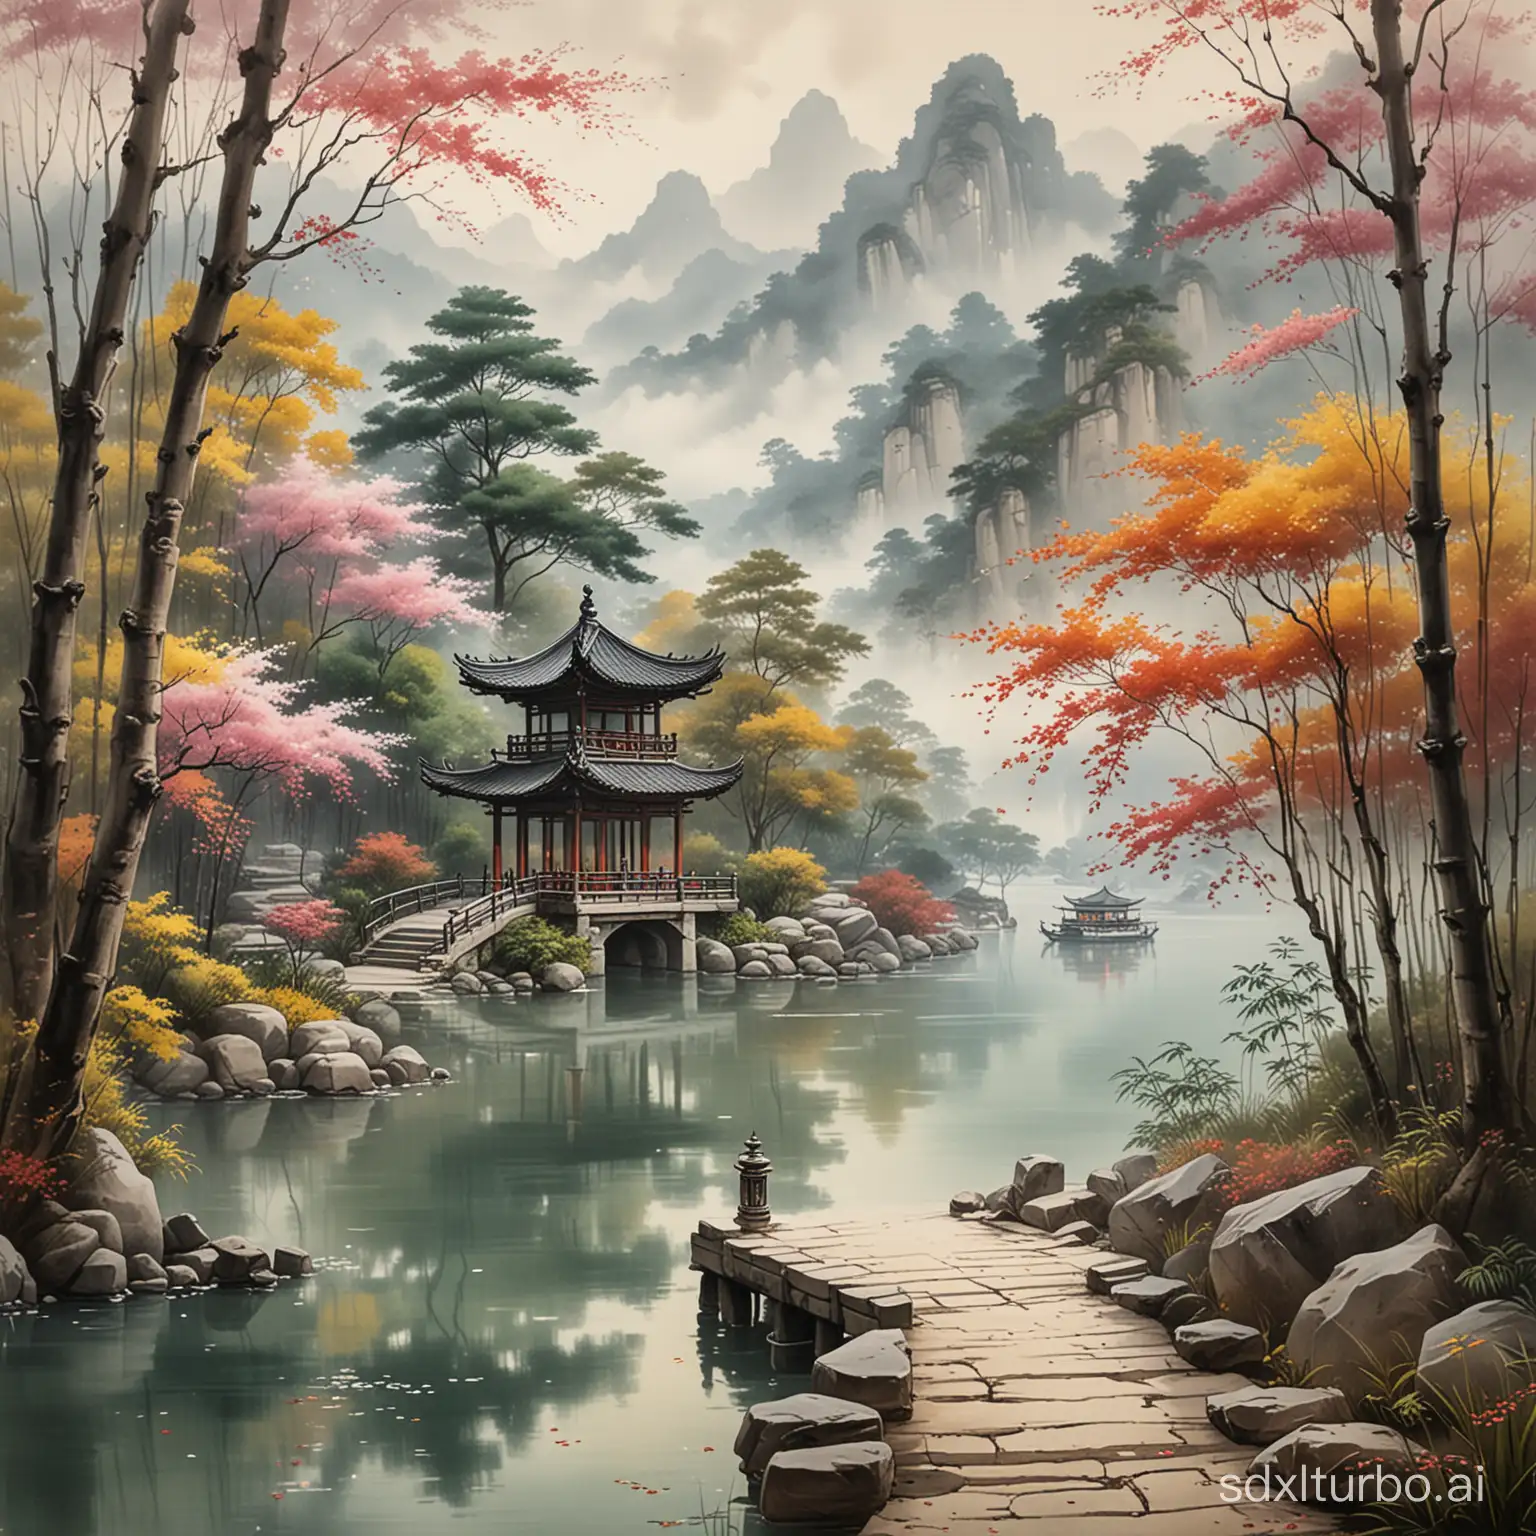 Tranquil-Chinese-Pavilion-by-a-Forested-Lake-Serene-Landscape-Ink-Painting